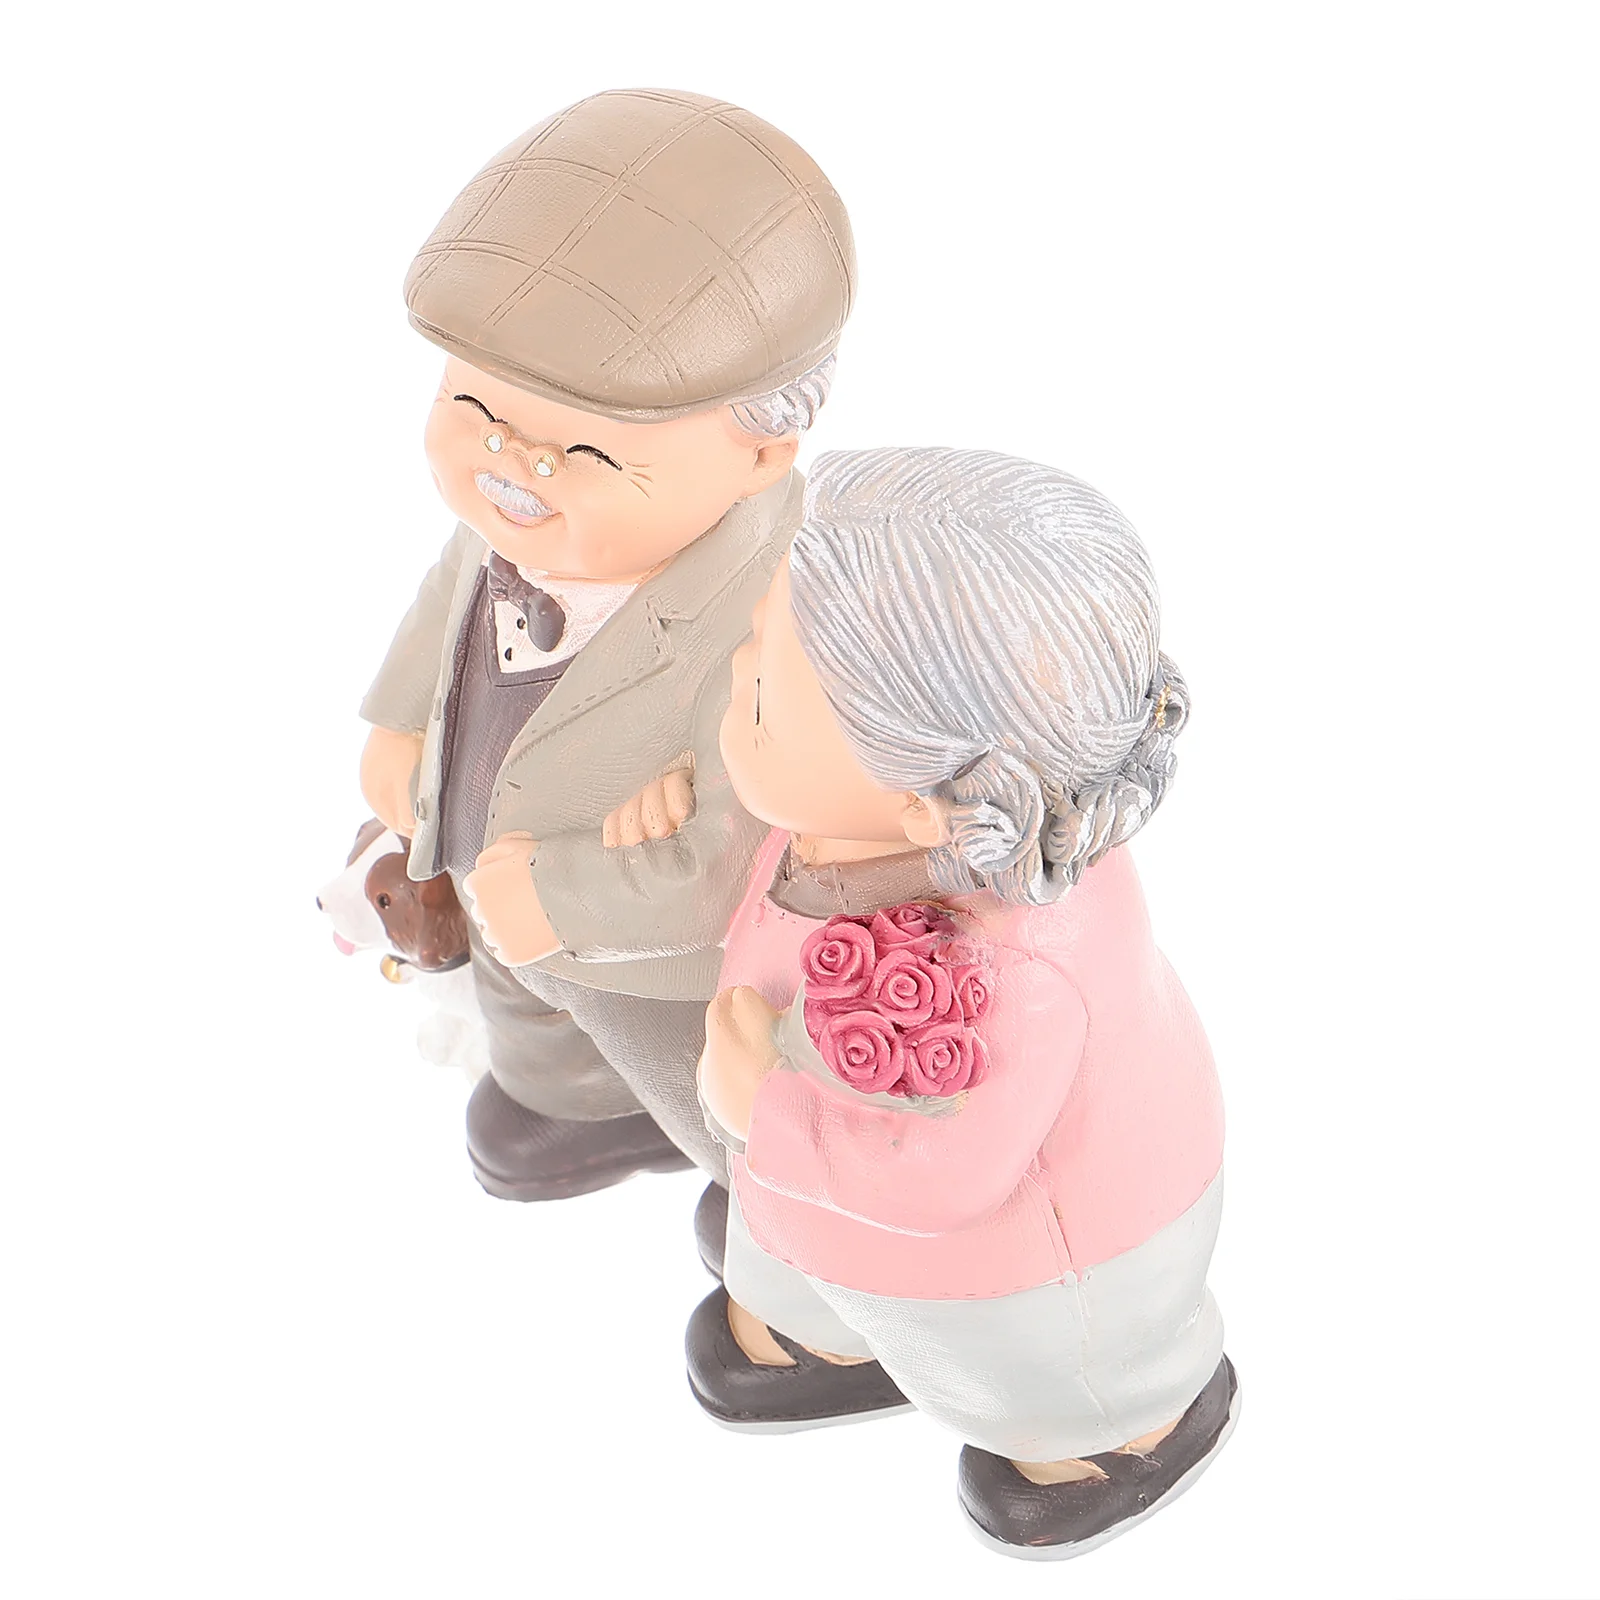 

Wedding Topper Old Man Granny Ornaments Multi-color Decoration Caring Resin Figurine Adornment Eye-catching Lovers